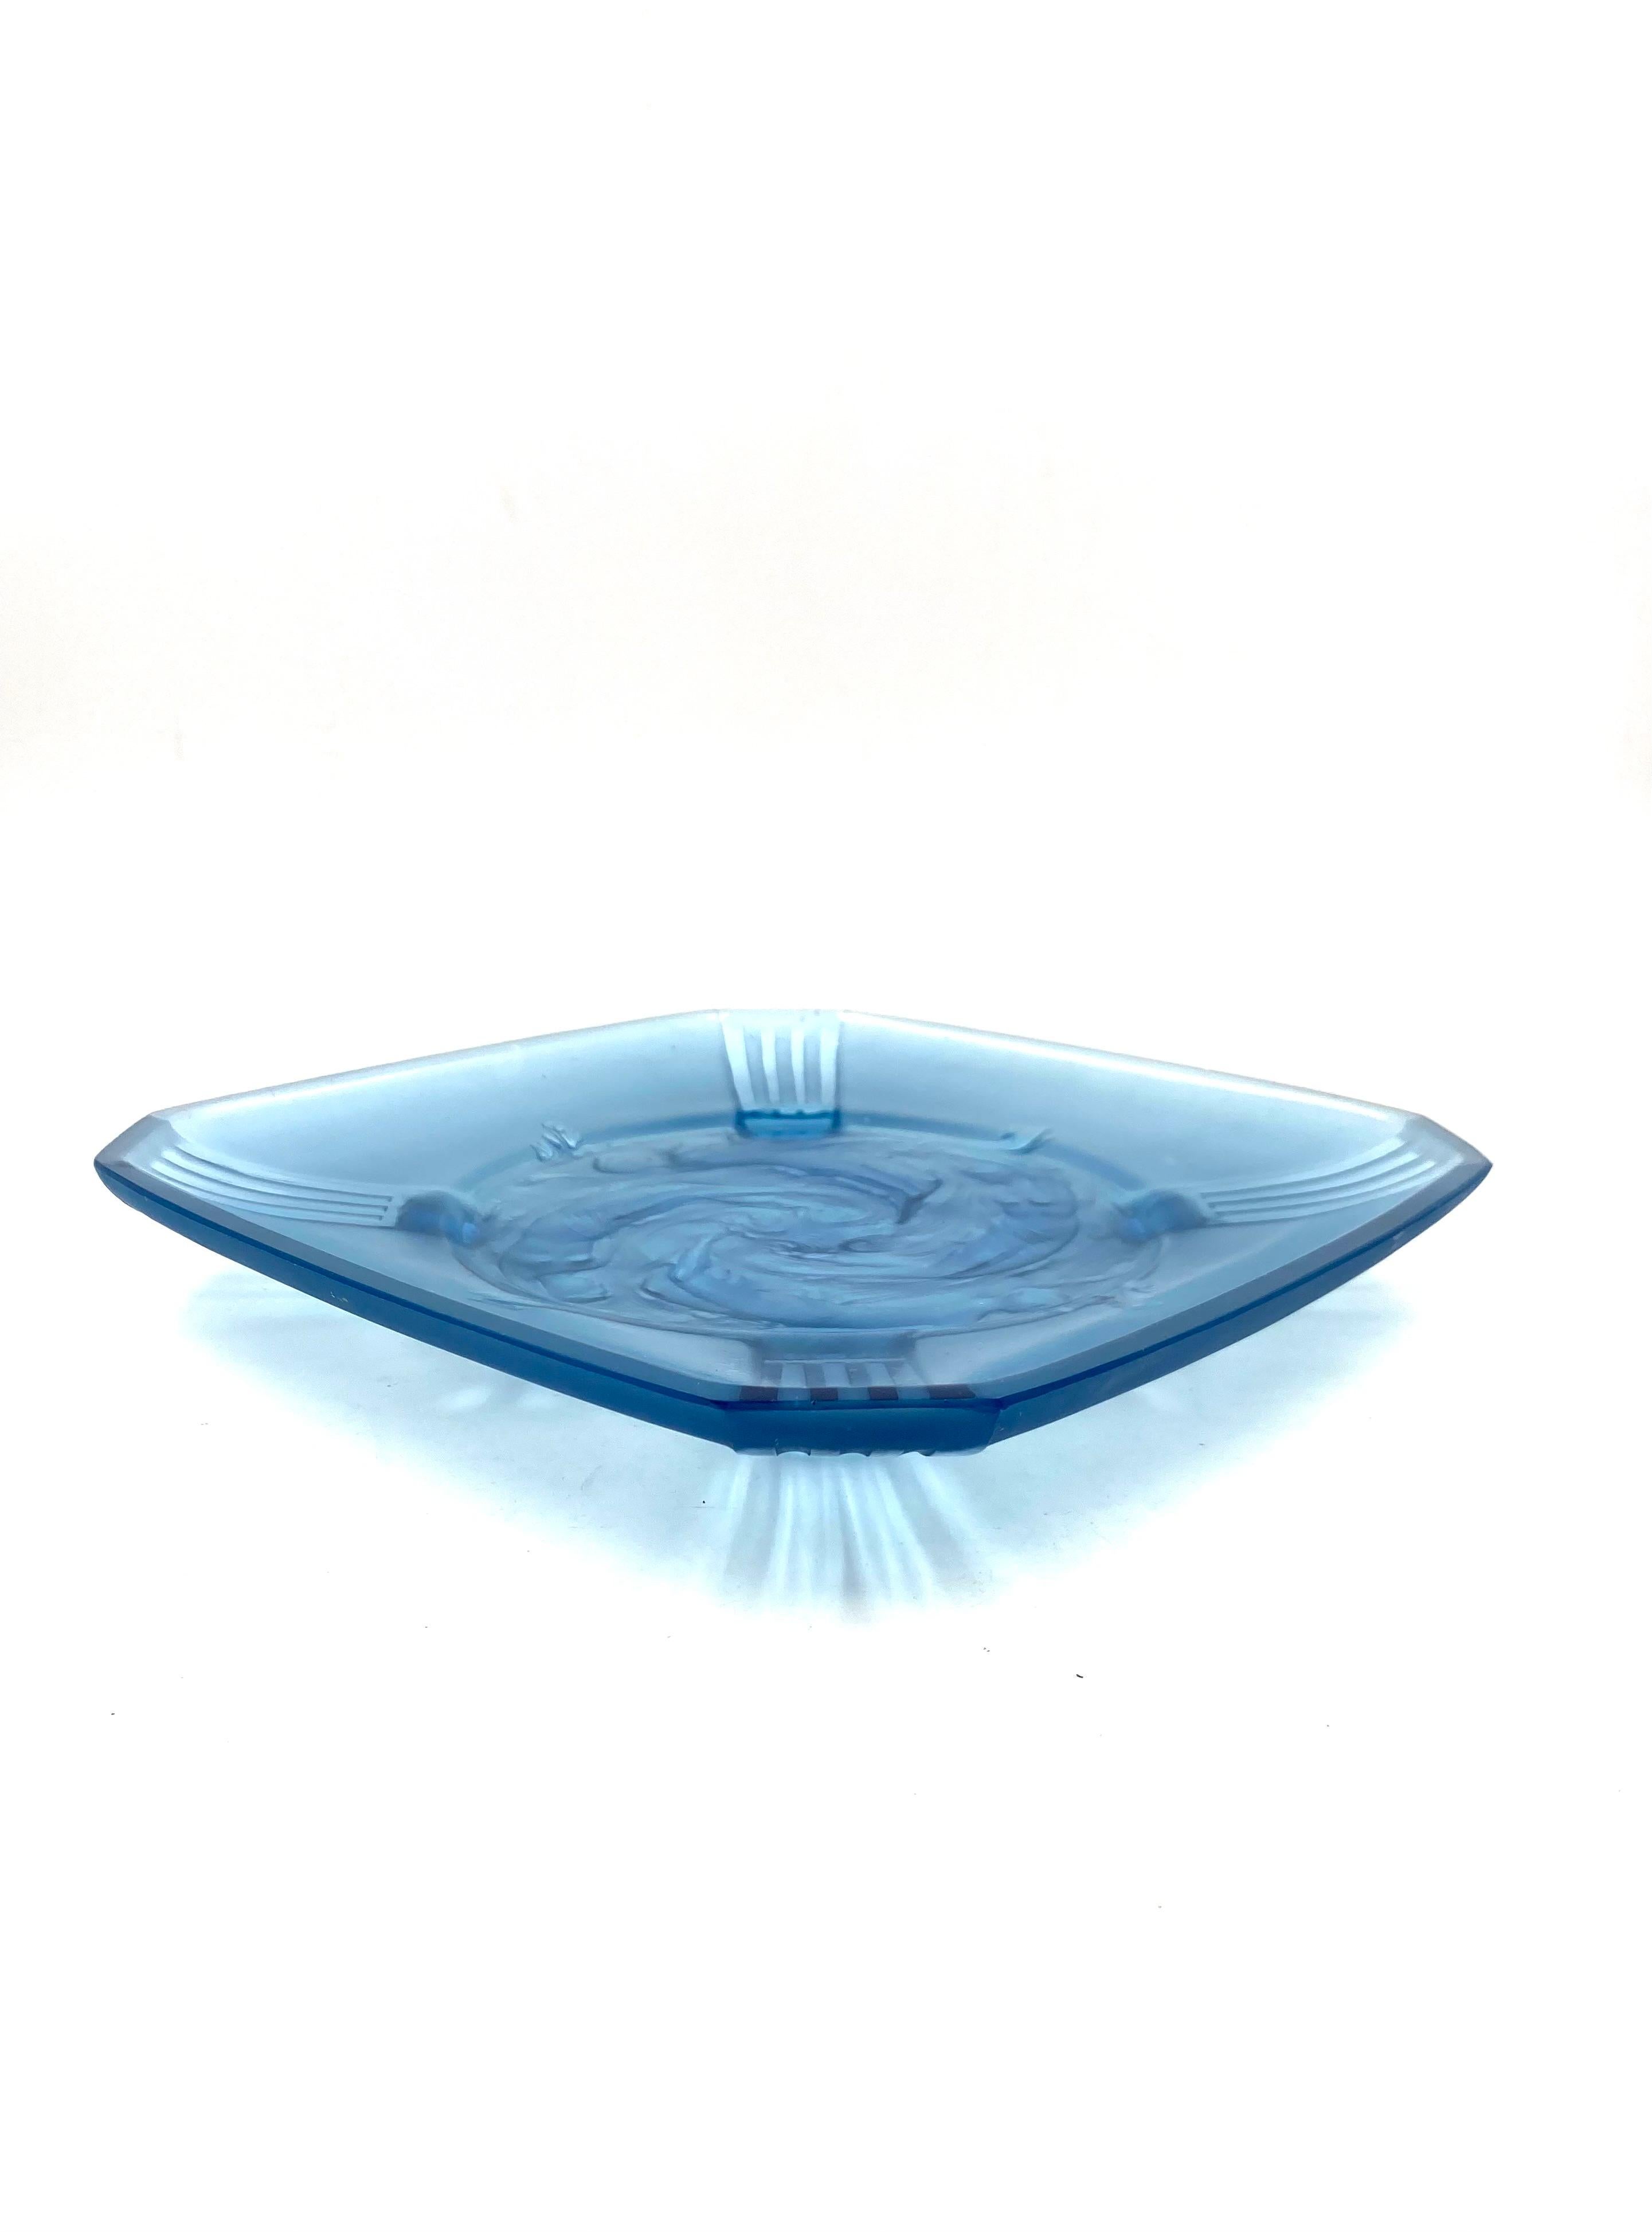 Verreries Des Hanots, Important 'Naiads' Molded Glass Tray, France, 1930s For Sale 8